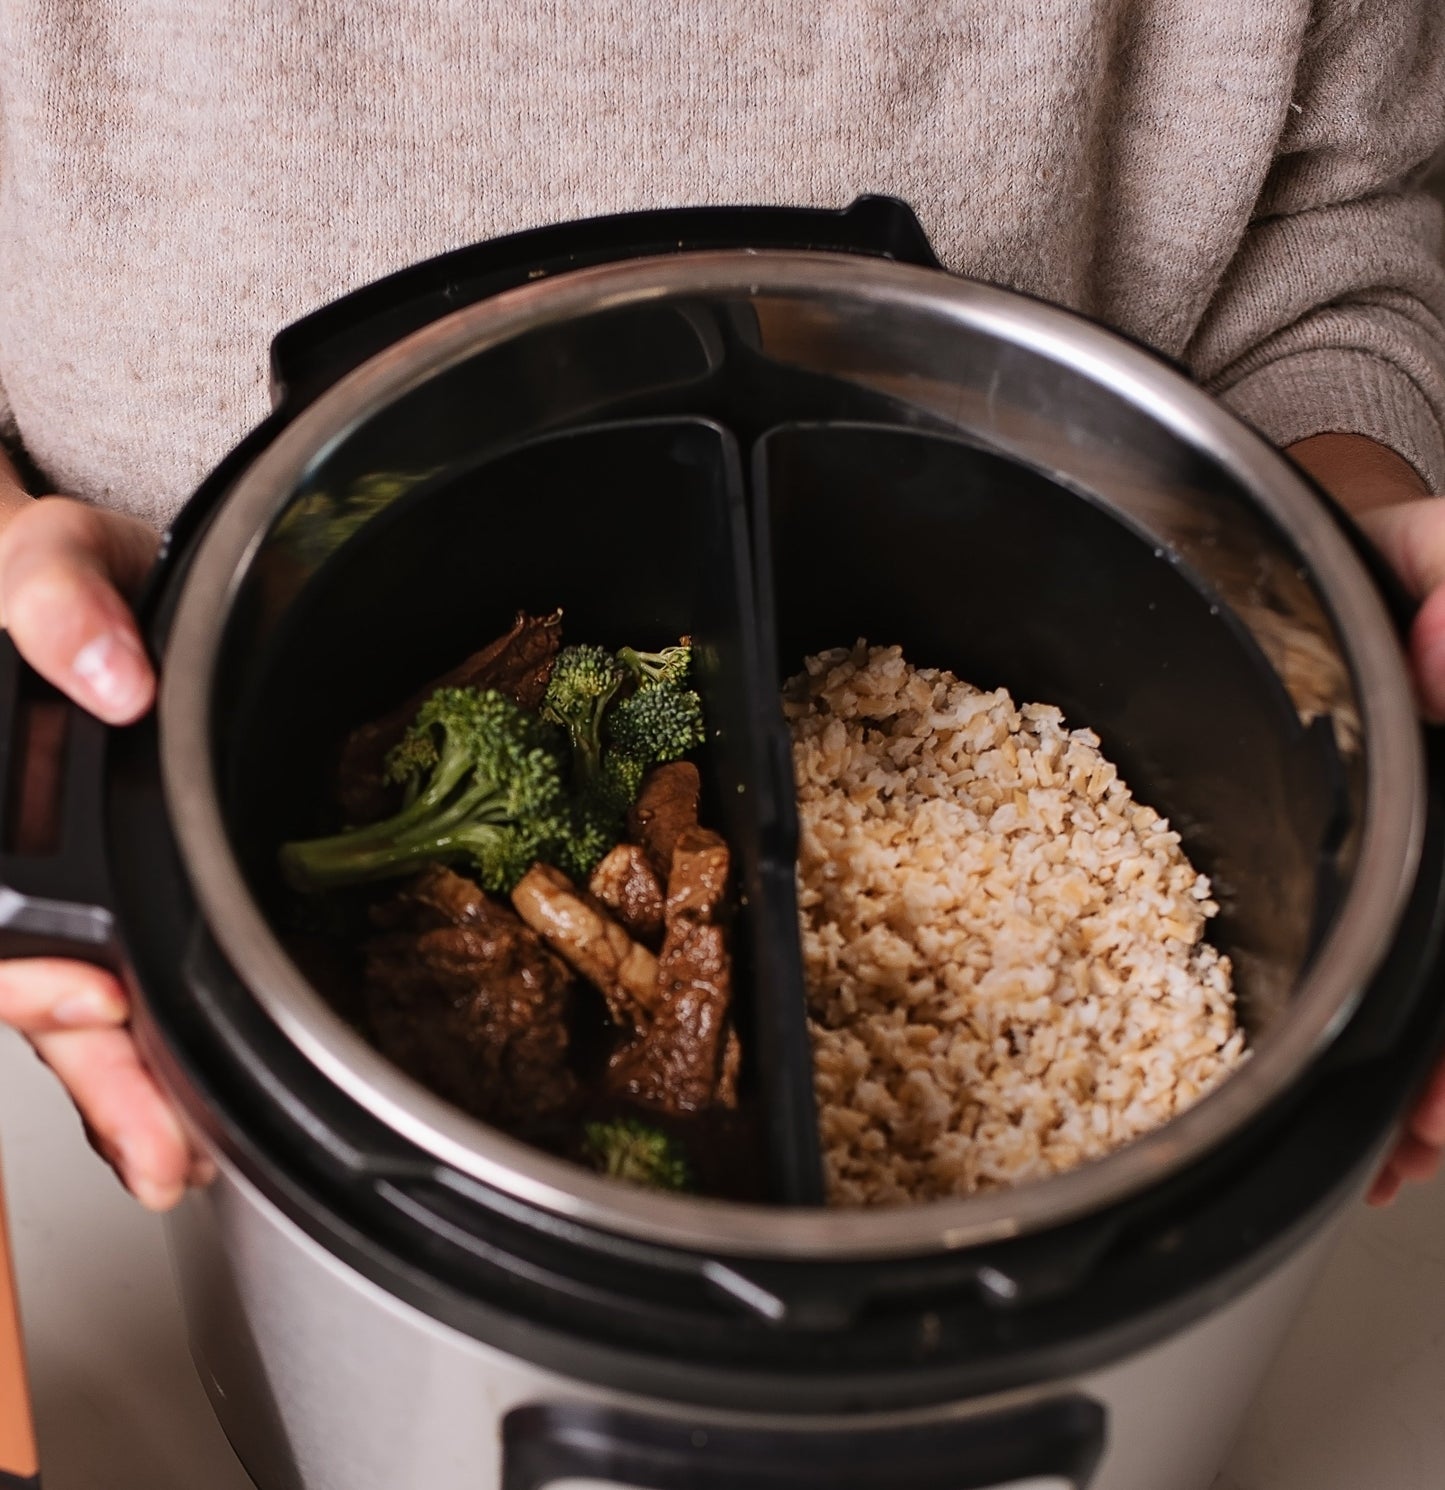 image with beef and chicken in one pressure cooker pocket and rice in another pocket